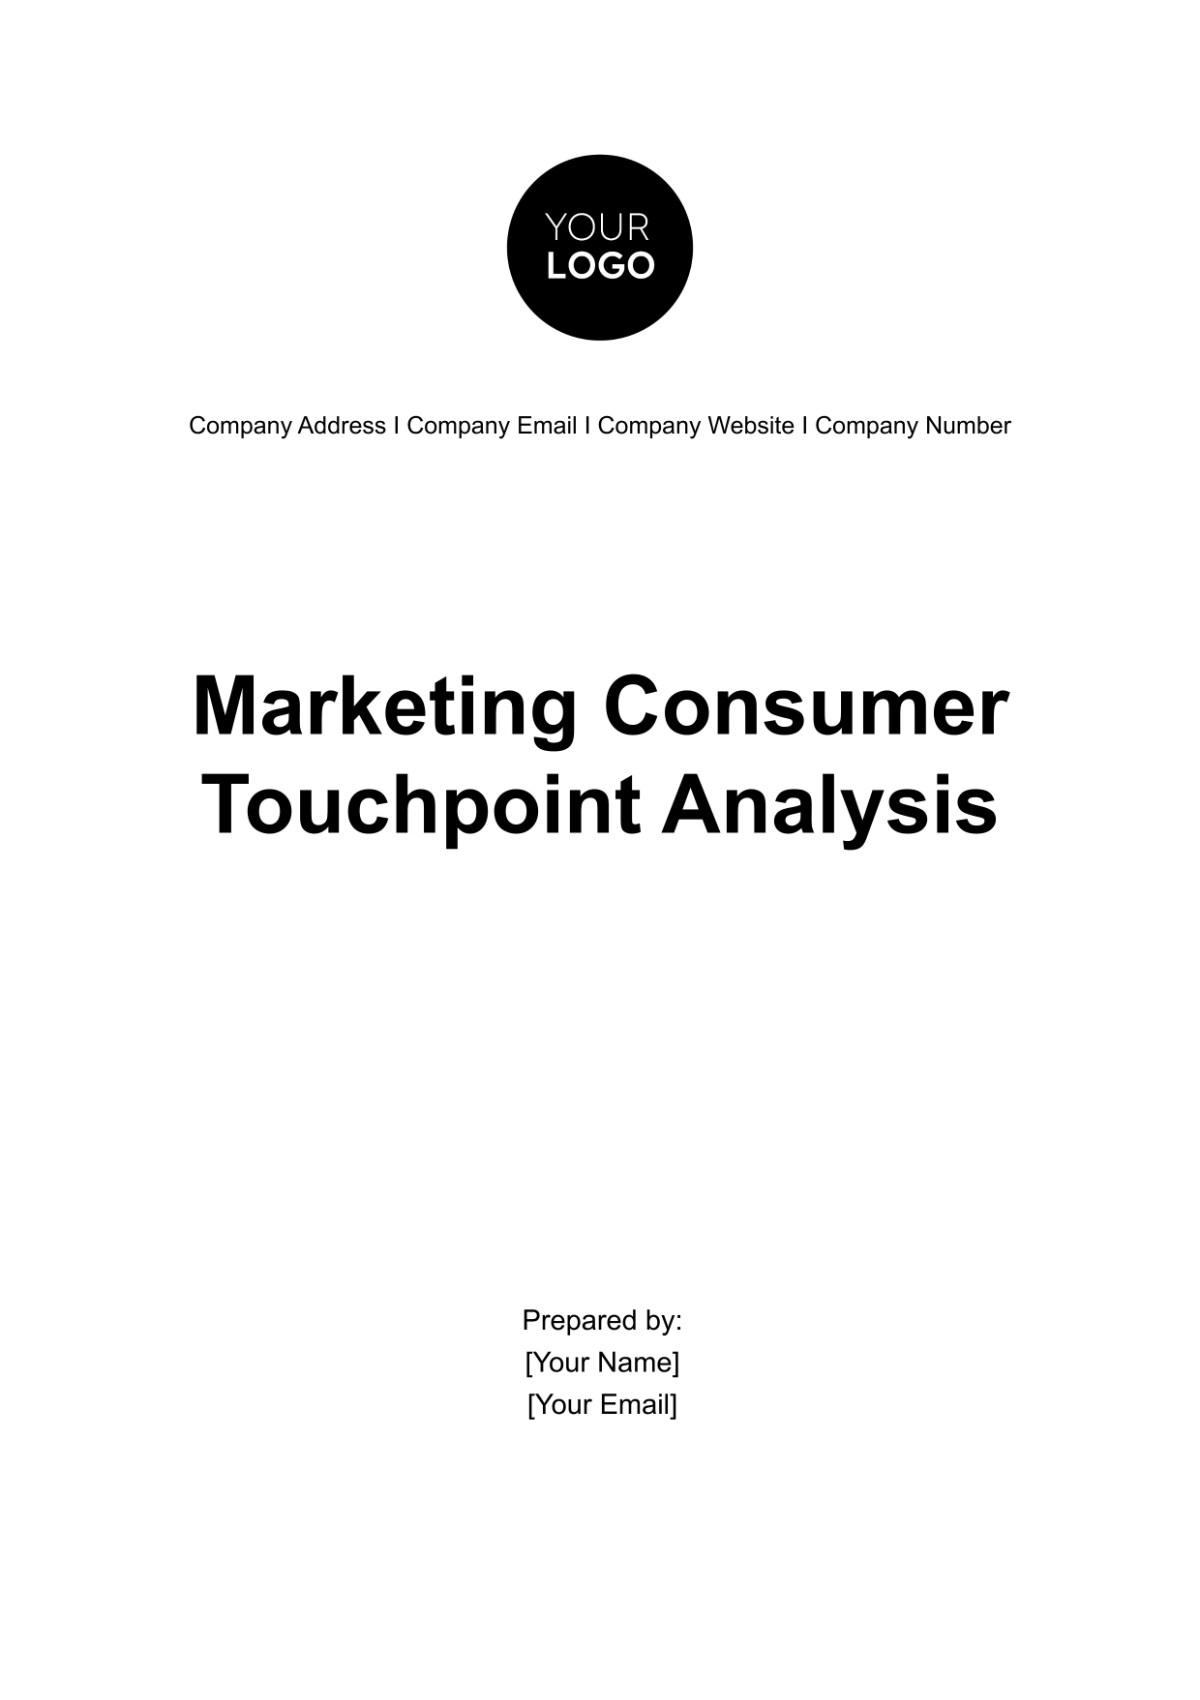 Marketing Consumer Touchpoint Analysis Template